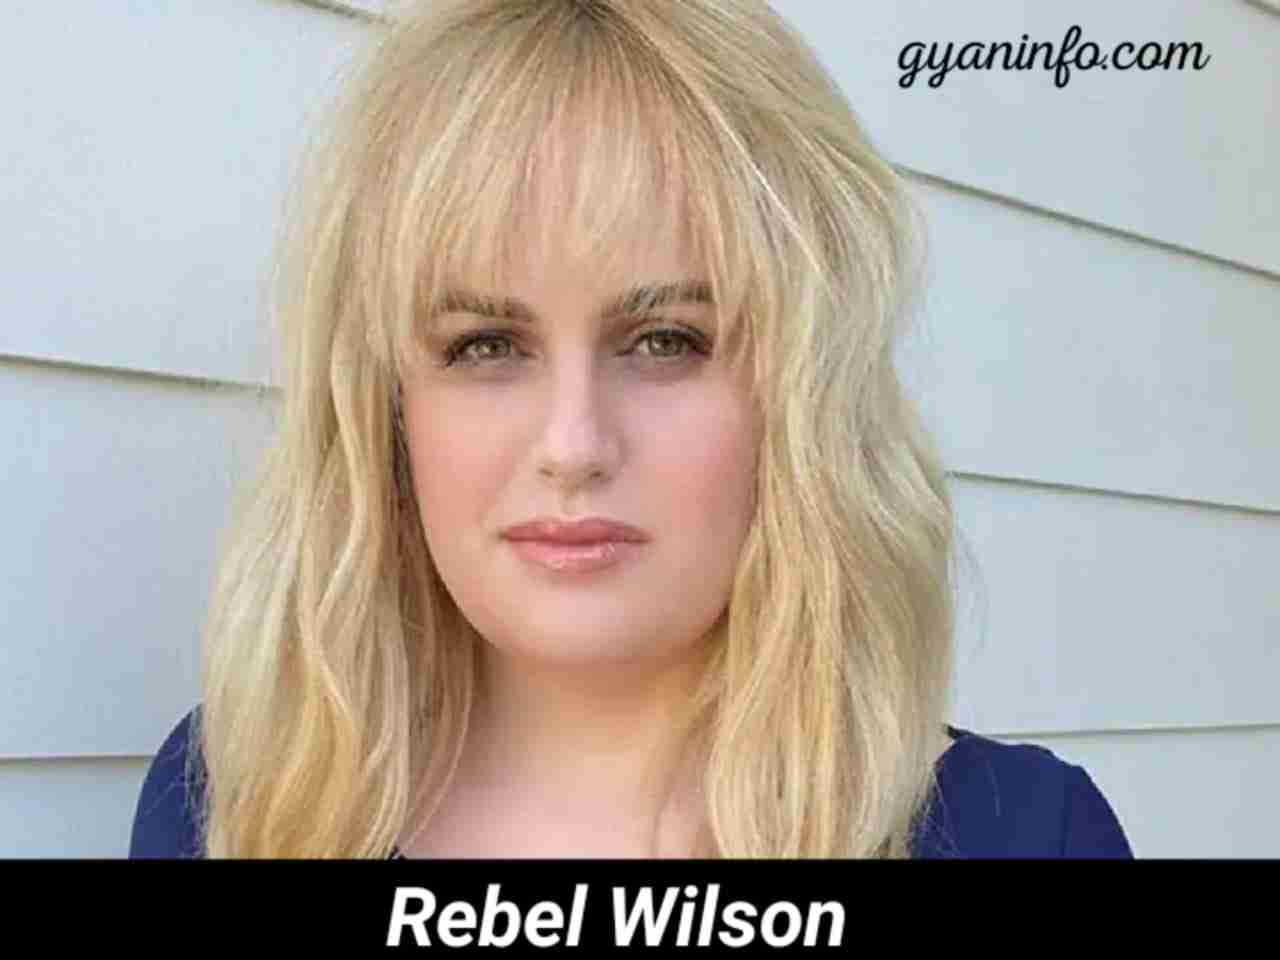 Rebel Wilson [Actress] Biography, Age, Height, Husband, Parents, Movies, Wiki & More